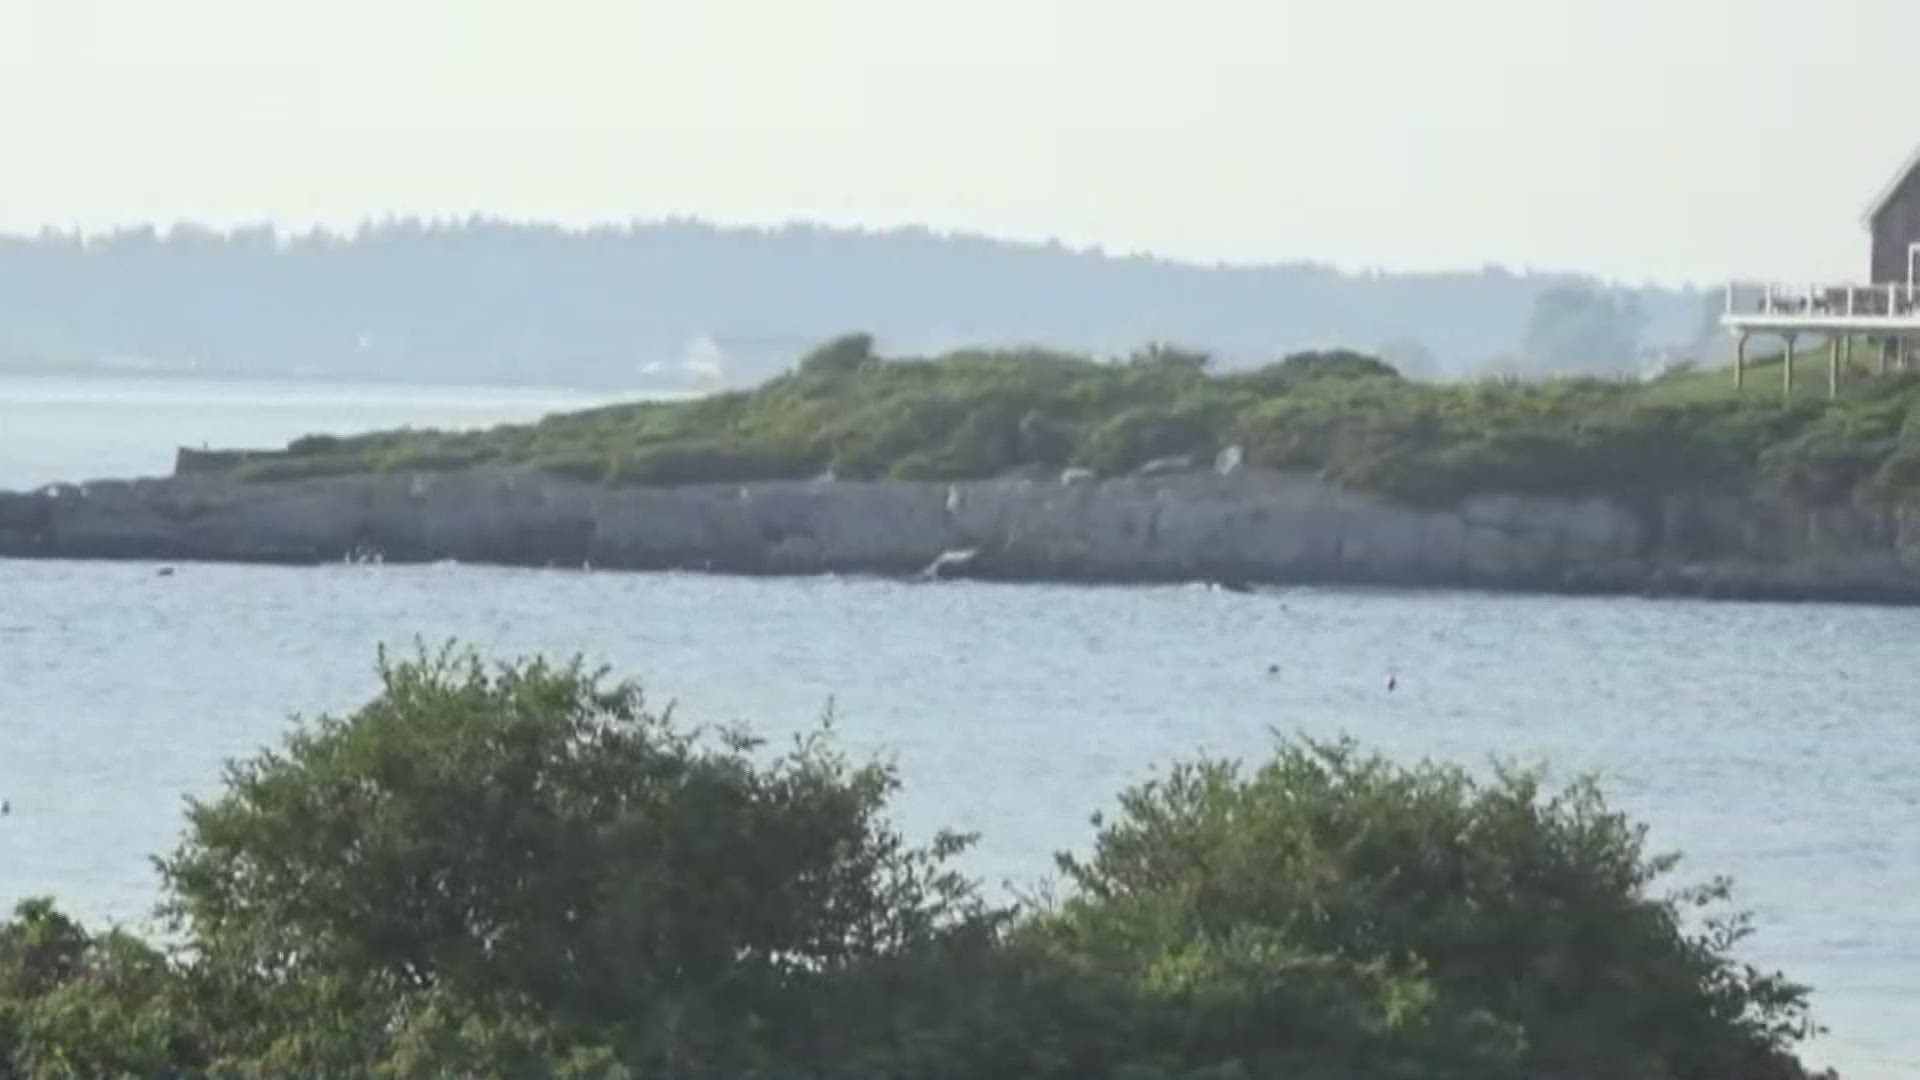 Witnesses say one woman is dead in possible shark attack off Harpswell coast, police have